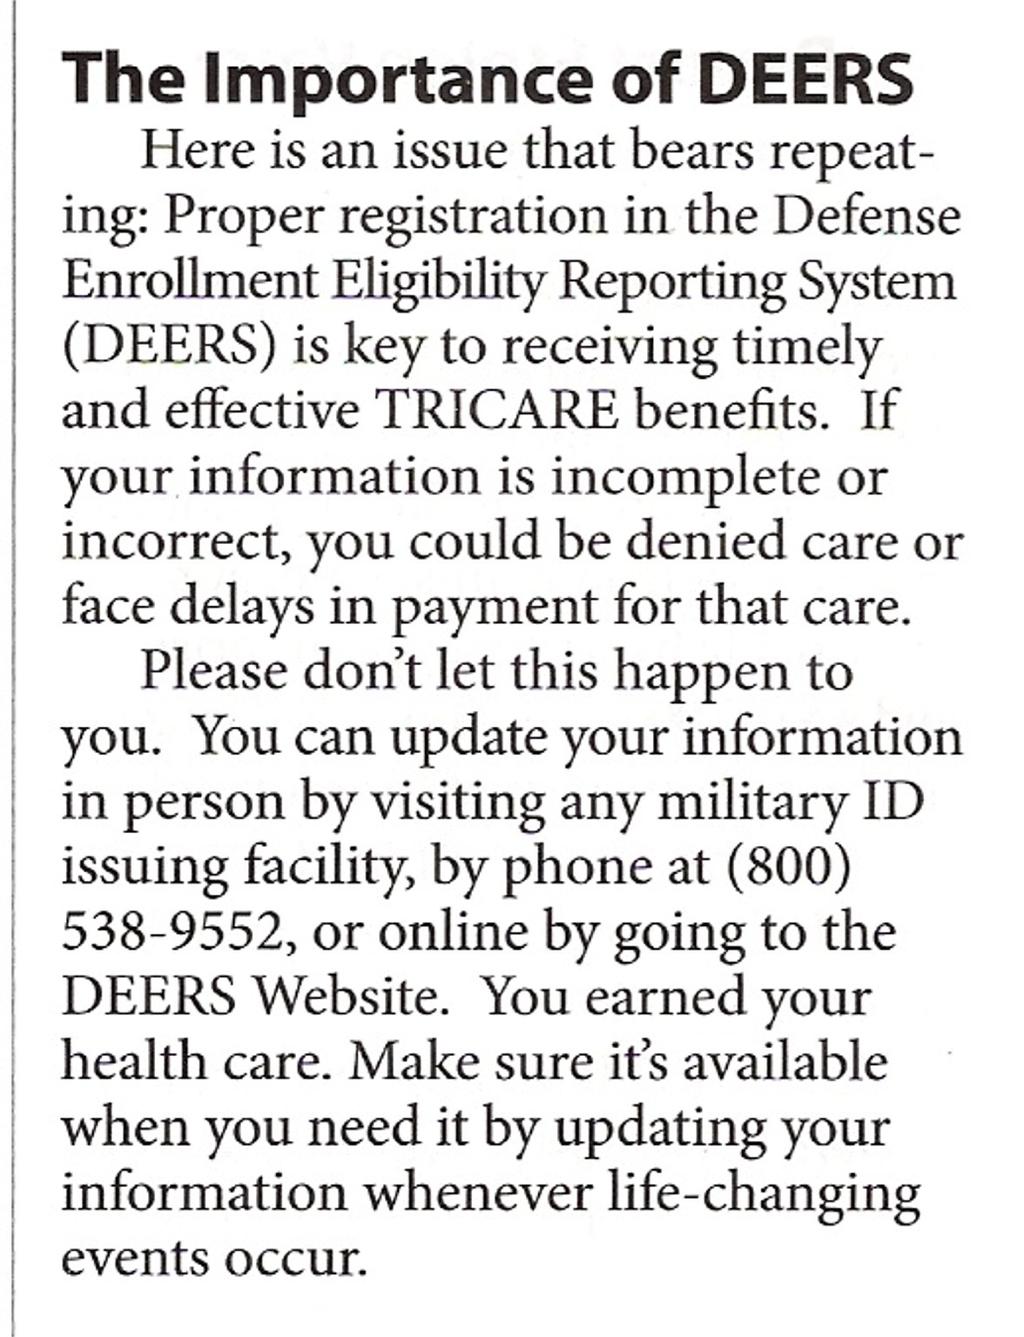 Page 2 The Trooper FREE VACCINES FOR TRICARE BENEFICIARIES Thanks to a recent change, TRICARE beneficiaries can visit retail network pharmacies to receive seasonal flu, H1N1 flu and pneumonia